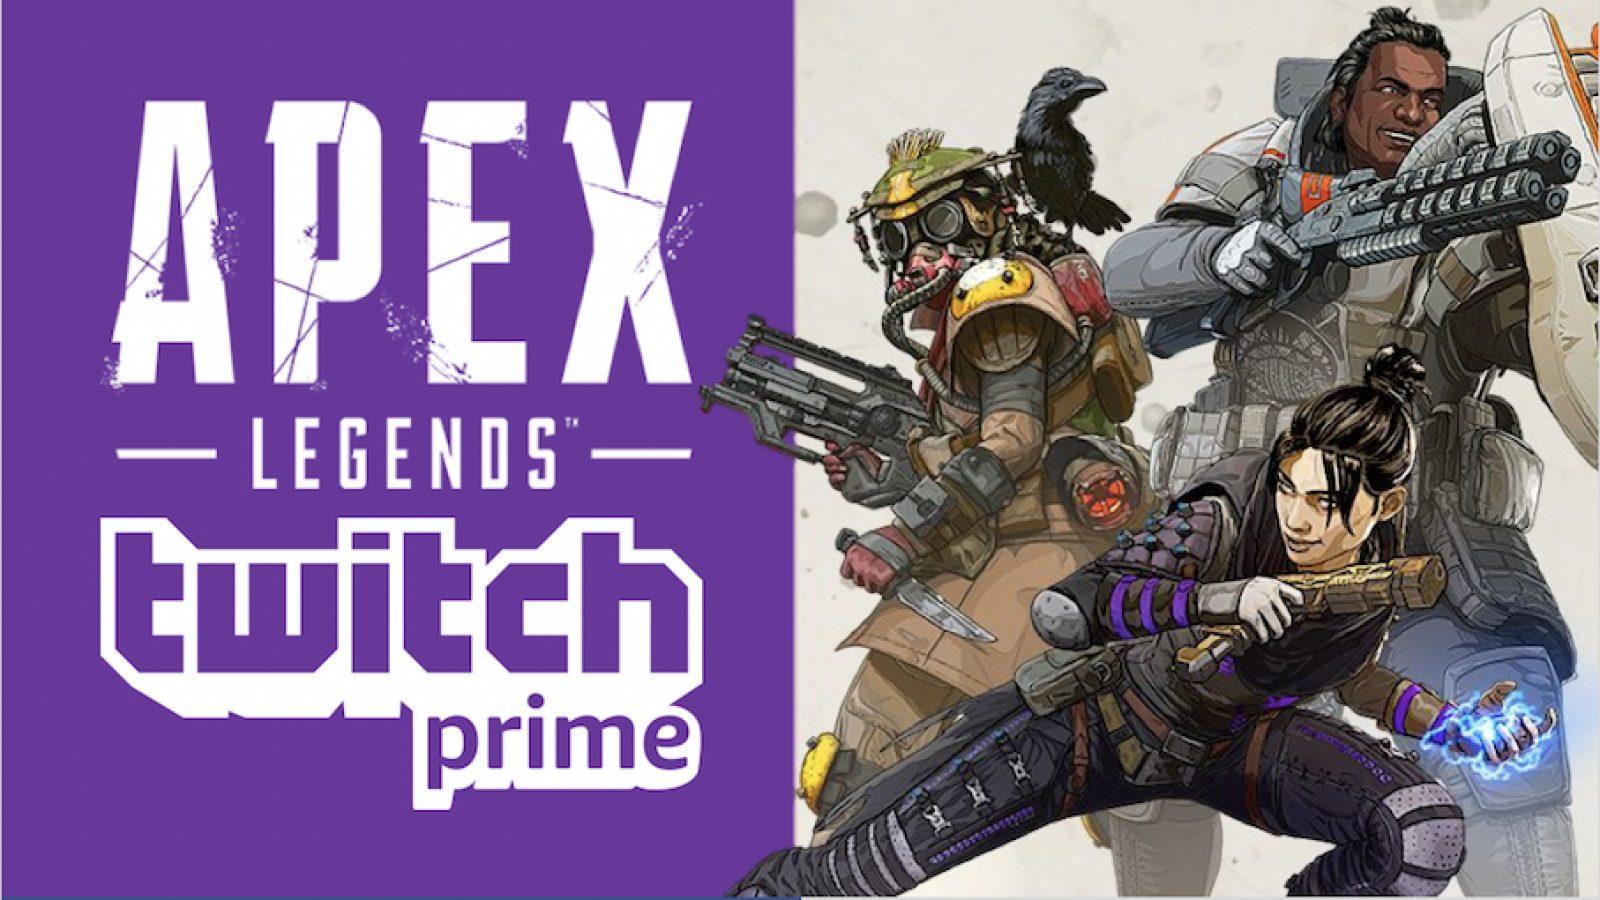 Apex Legends exploit has been discovered that grants Twitch Prime